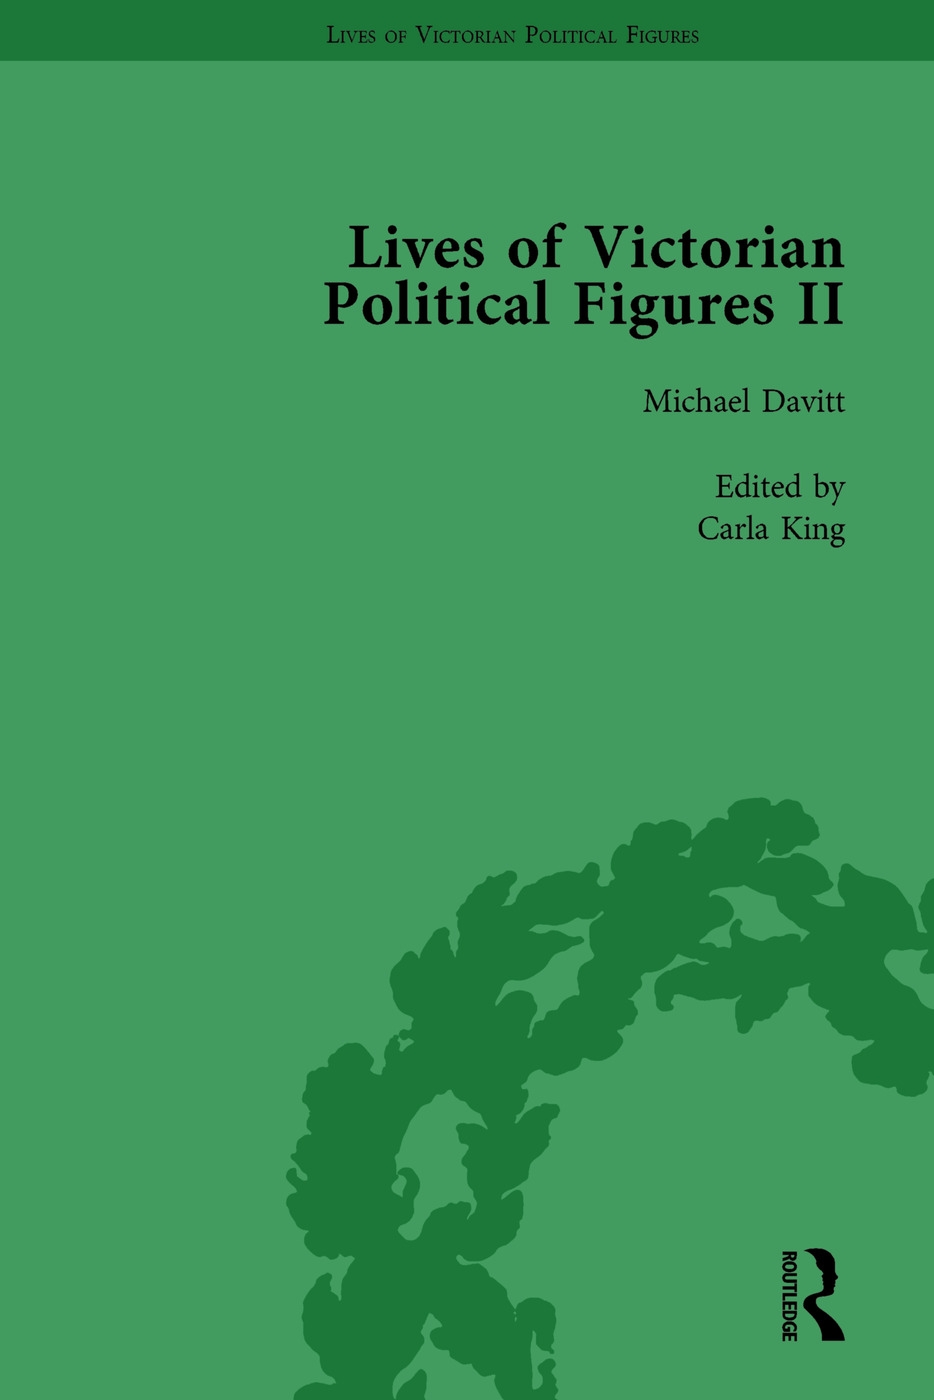 Lives of Victorian Political Figures, Part II, Volume 3: Daniel O’Connell, James Bronterre O’Brien, Charles Stewart Parnell and Michael Davitt by Thei